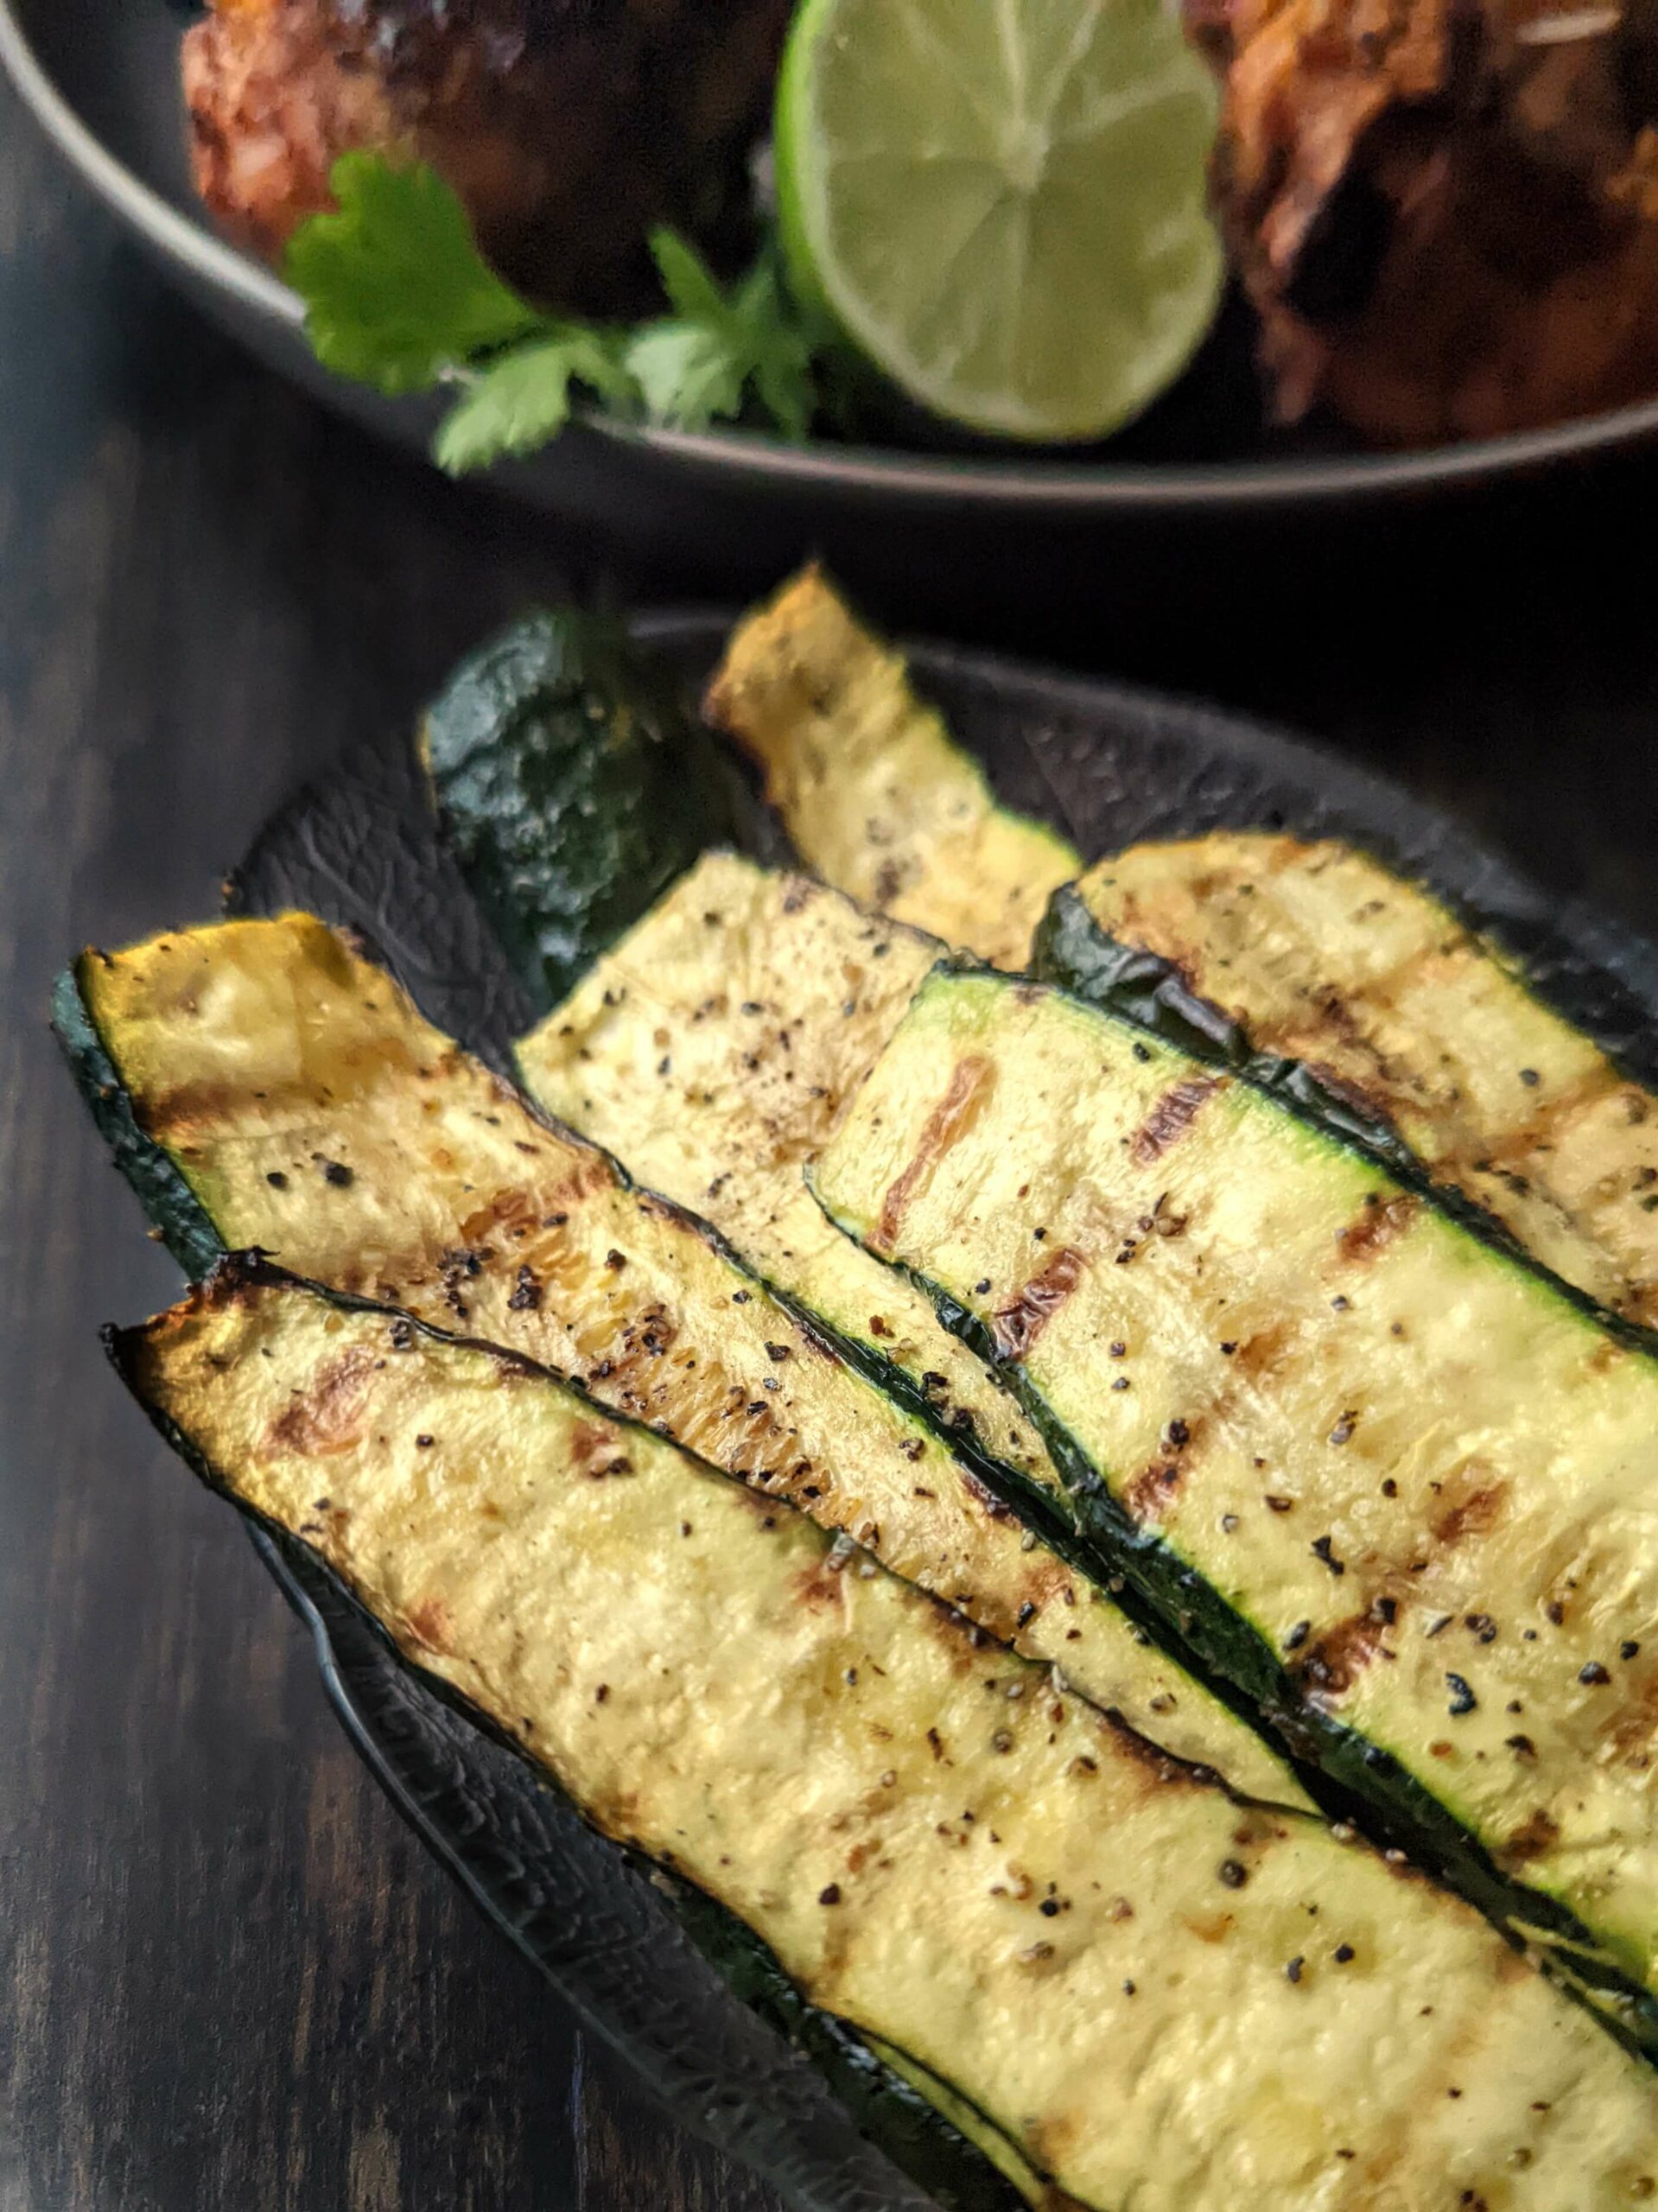 Grilled zucchini in a serving dish with grilled chicken in the background.